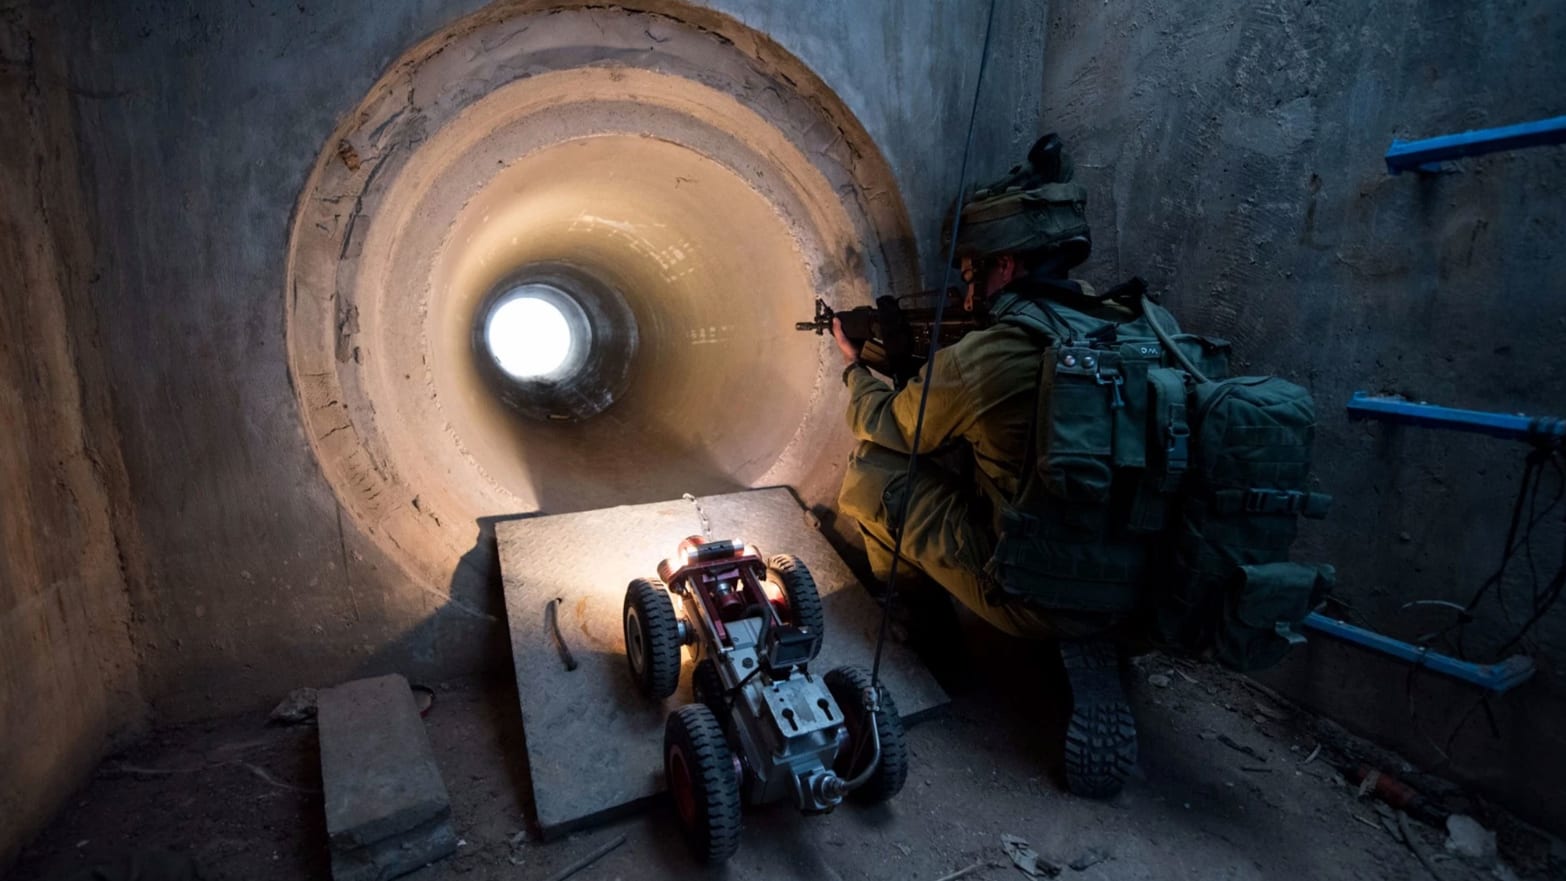 An IDF soldier peers into a tunnel while a drone enters